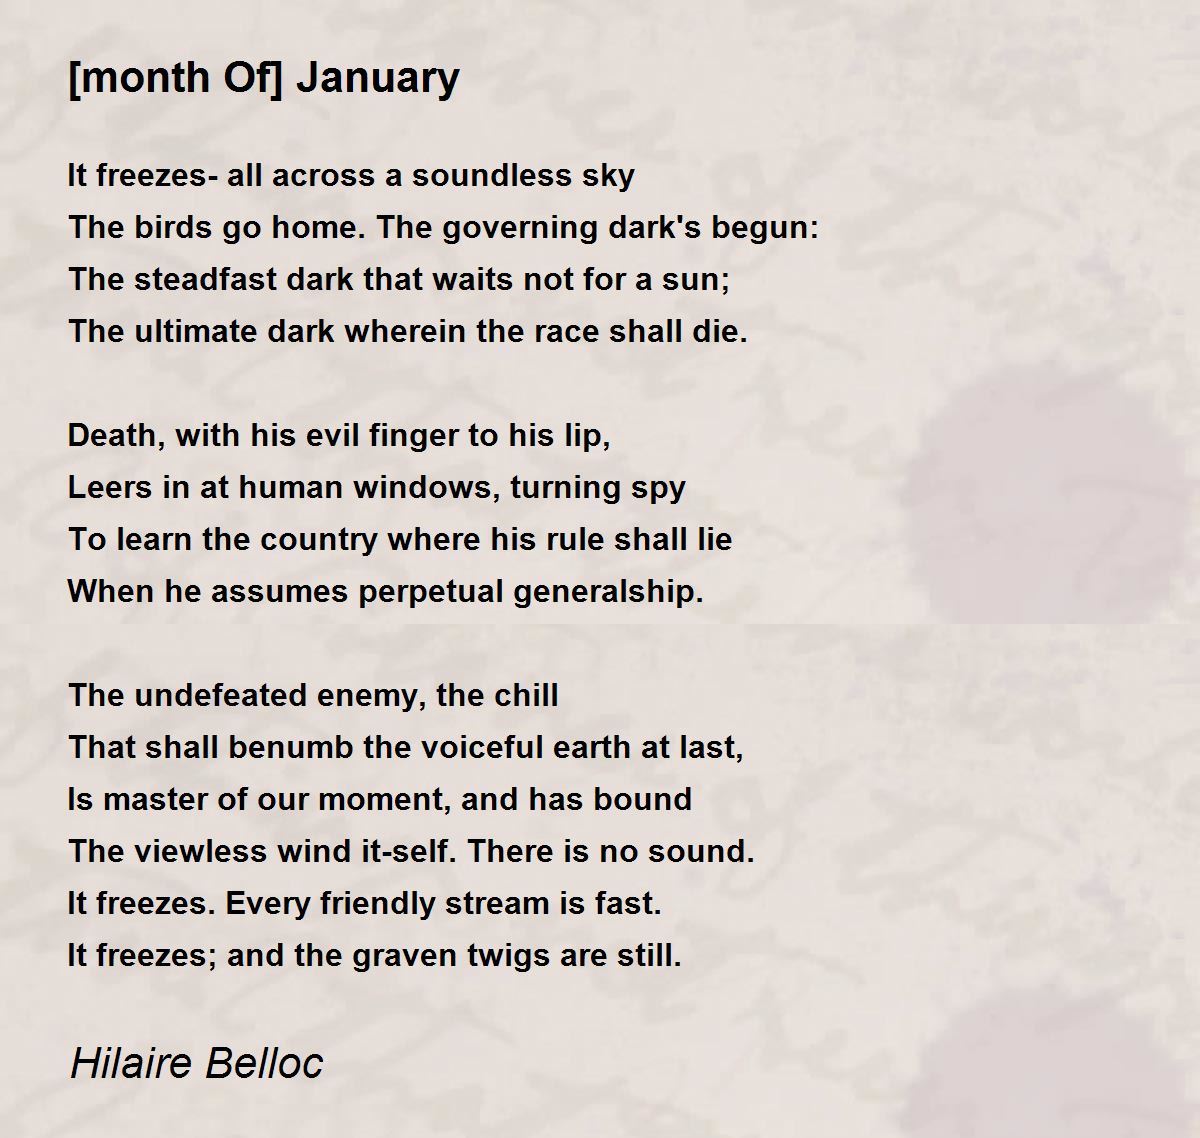 [month Of] January Poem by Hilaire Belloc - Poem Hunter